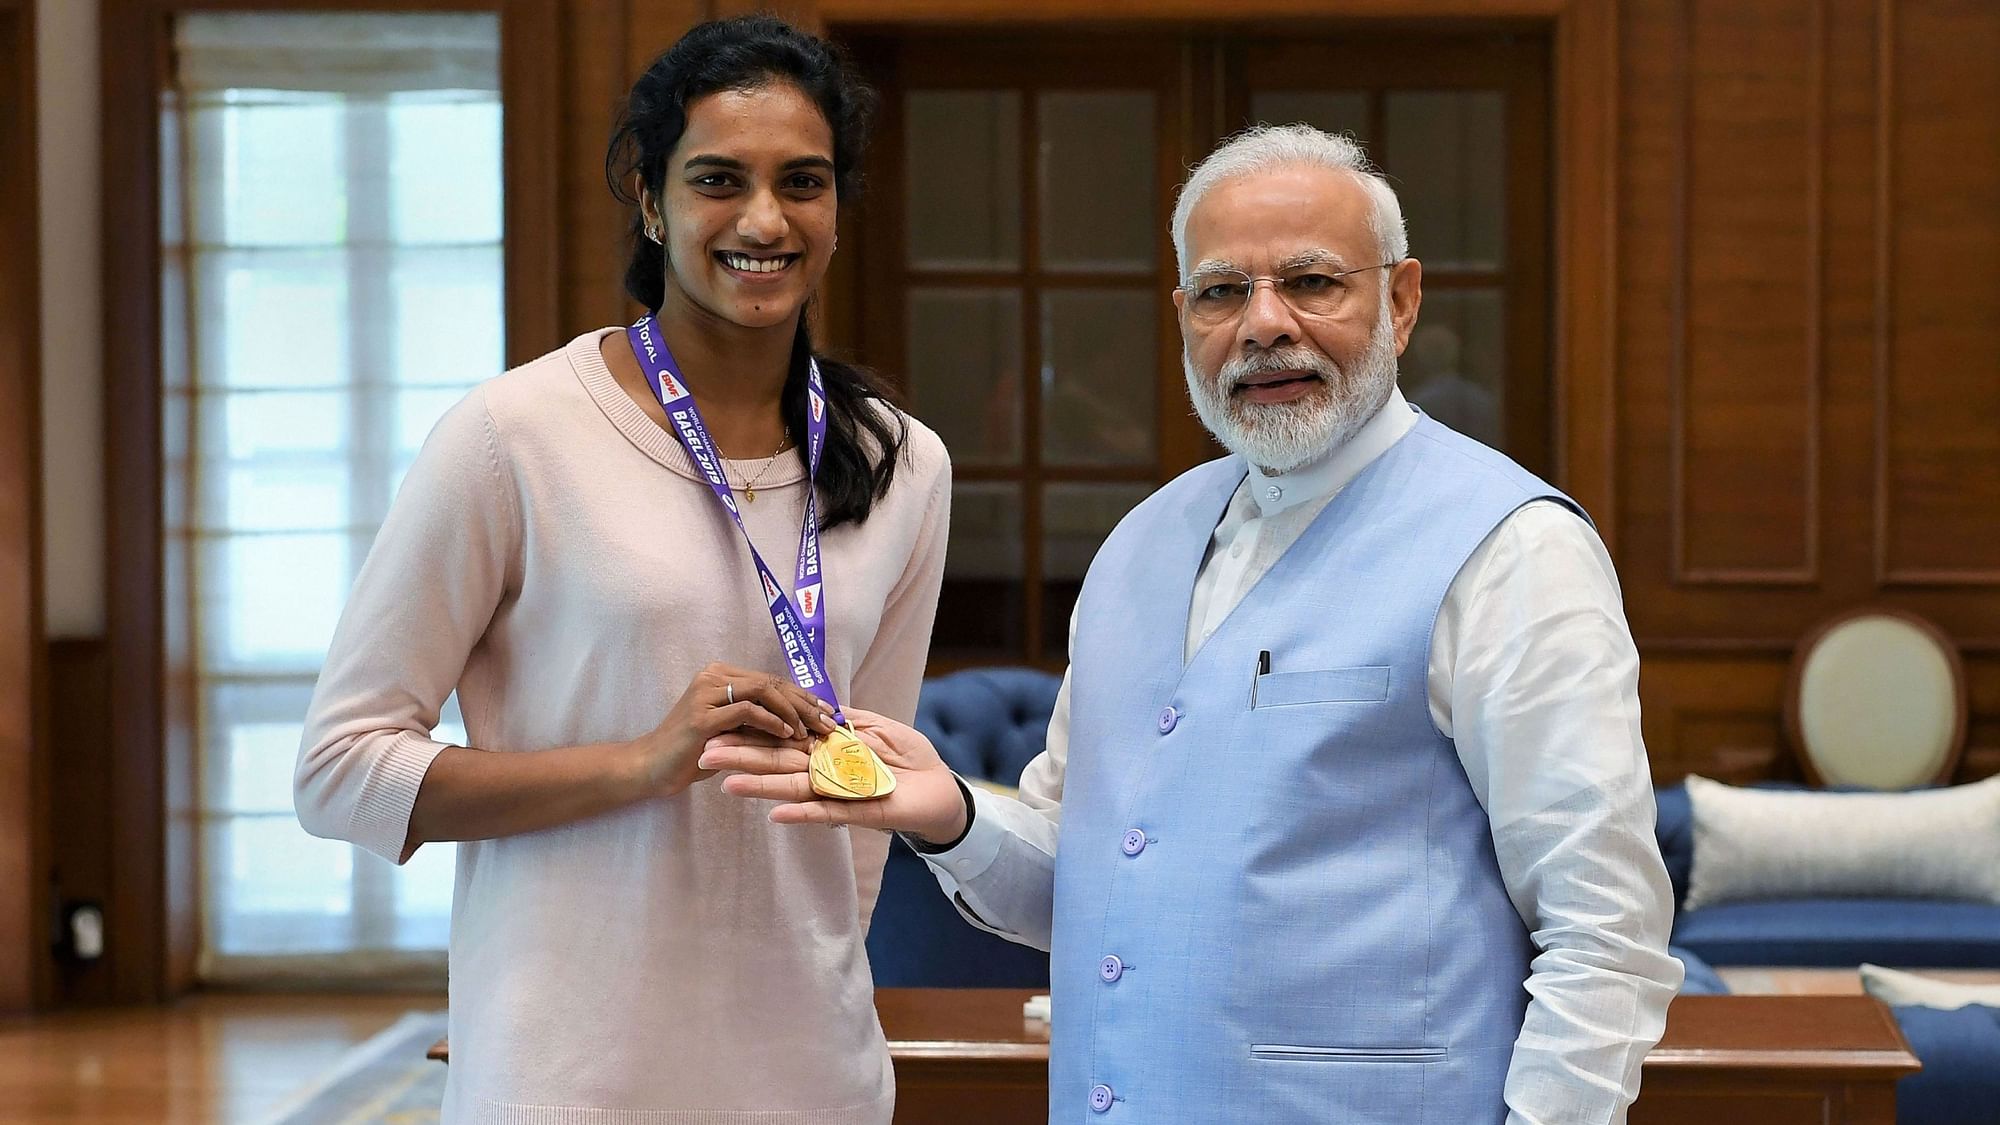  Prime Minister Narendra Modi meets World Champion PV Sindhu in New Delhi on Tuesday, 27 August.